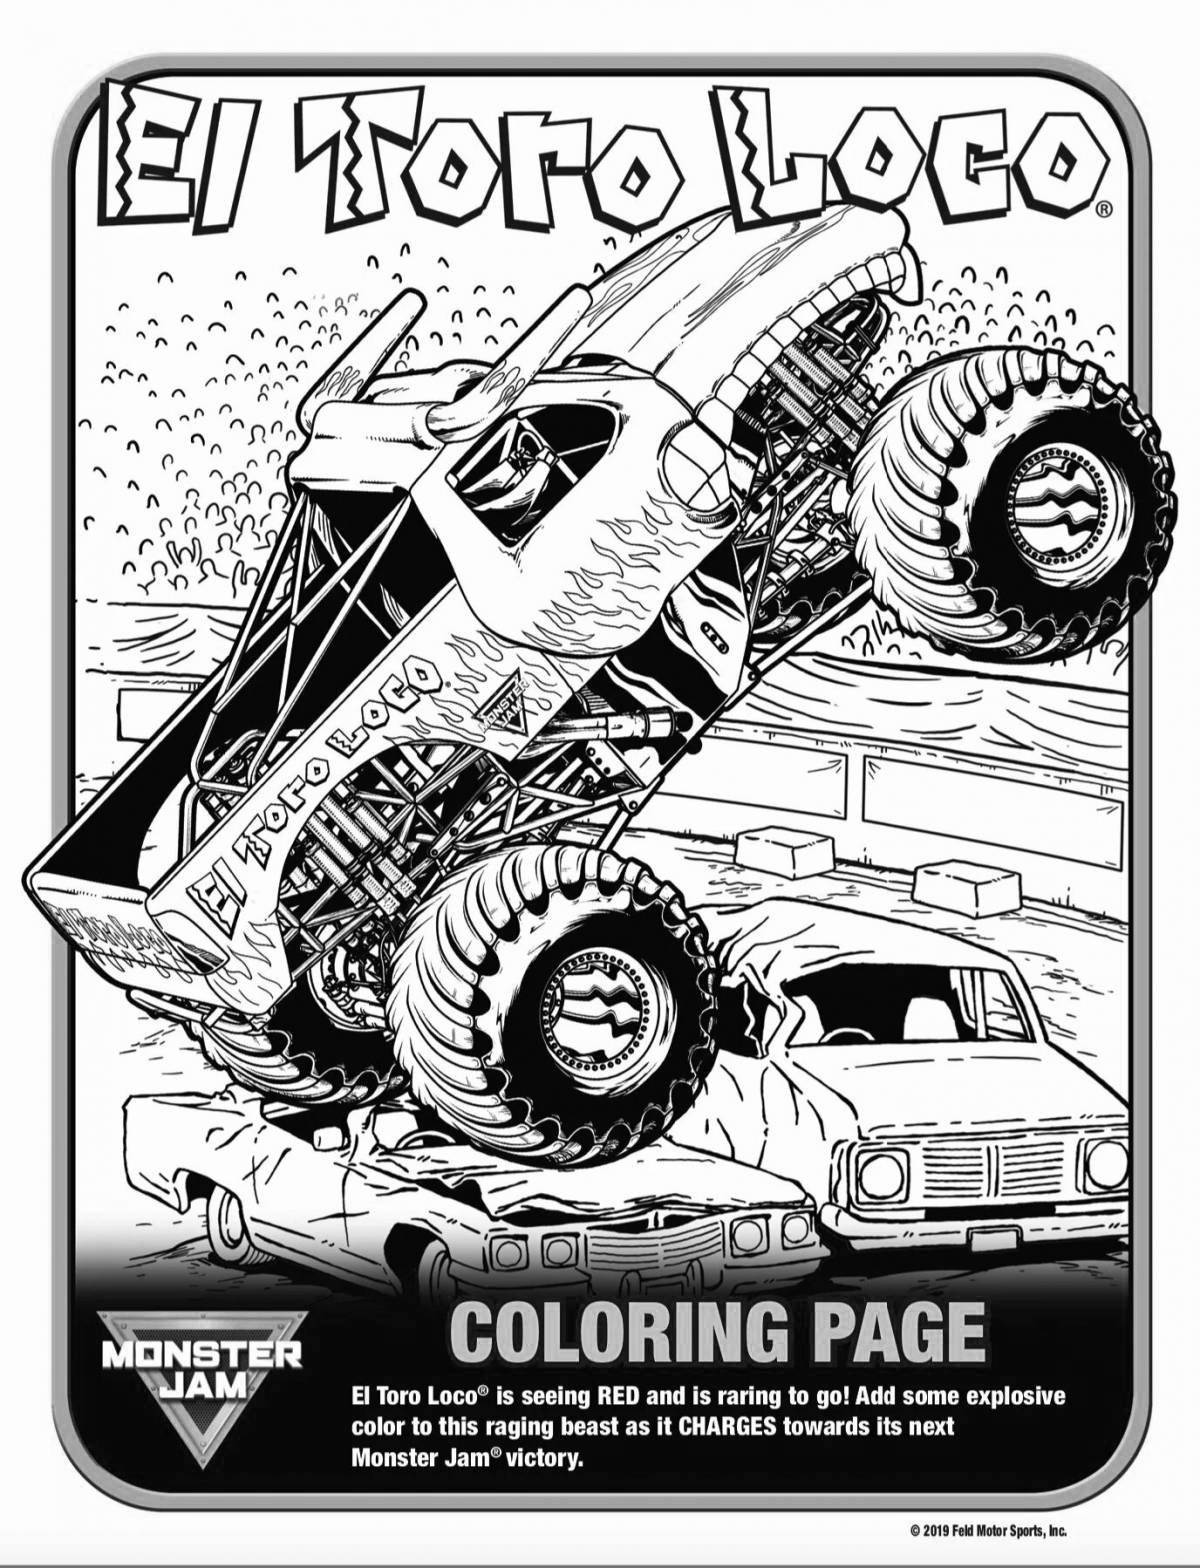 Gorgeous Monster Jam coloring page